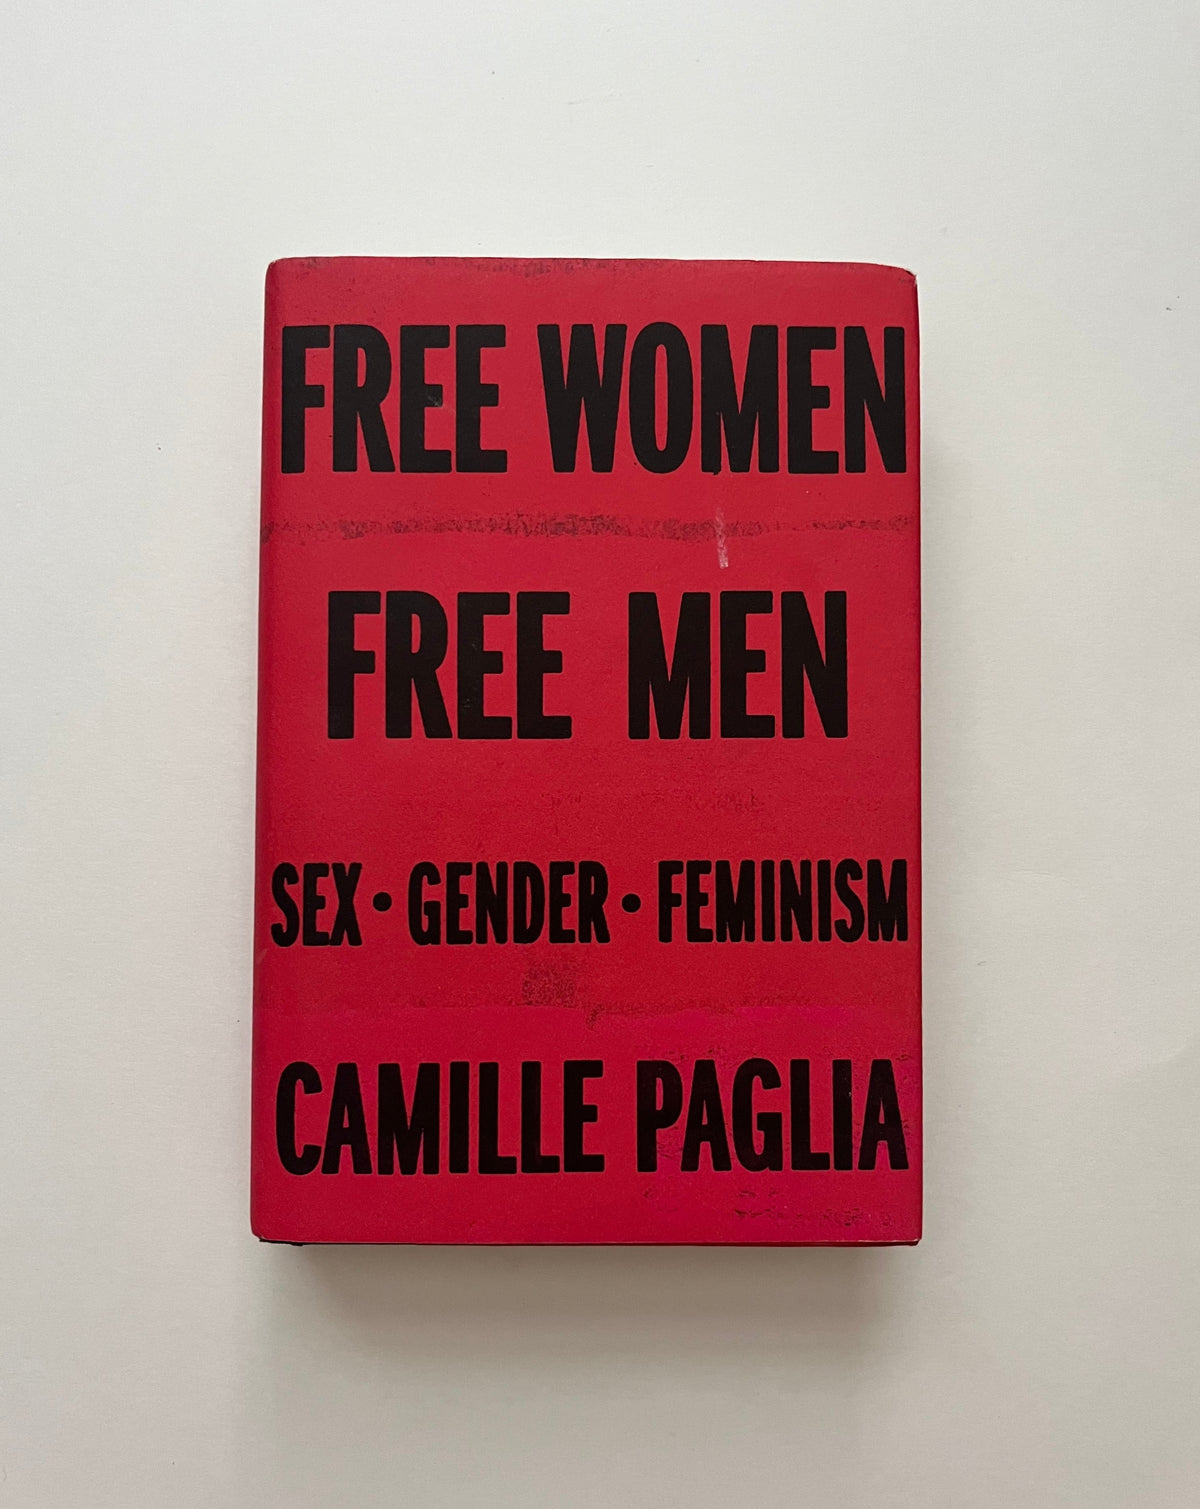 Free Women Free Men: Sex, Gender, Feminism by Camille Paglia